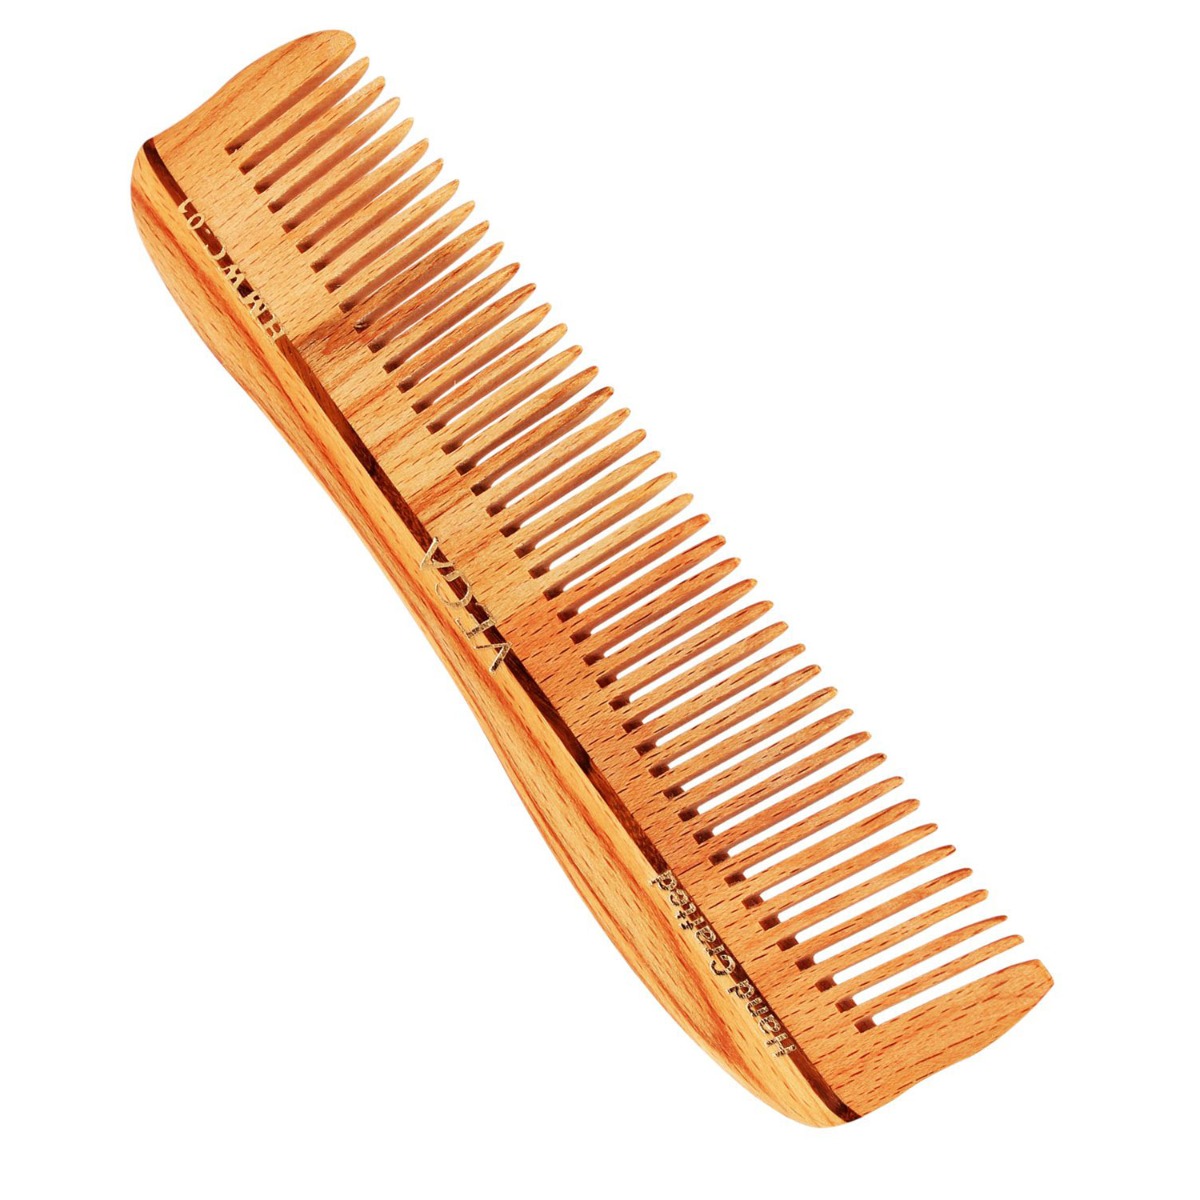 Vega Natural Wooden Styling Comb HMWC-01